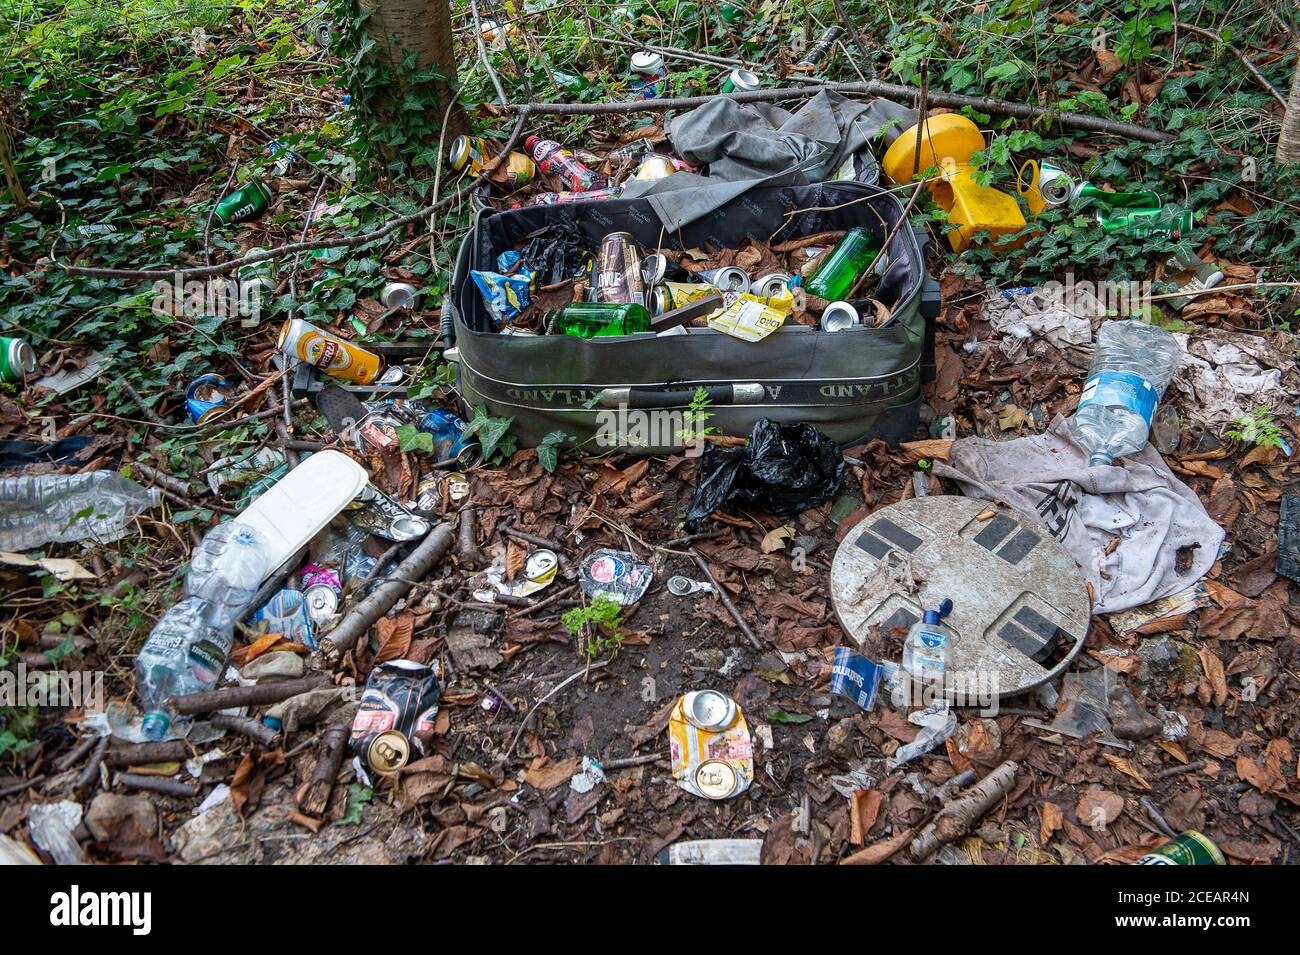 slough-berkshire-uk-31st-august-2020-an-abandoned-case-rubbish-and-empty-beer-cans-litter-the-countryside-by-the-grand-union-canal-in-slough-there-has-been-an-increase-in-the-amount-of-rubbish-left-in-the-countryside-during-the-coronavirus-lockdown-credit-maureen-mcleanalamy-2CEAR4N.jpg